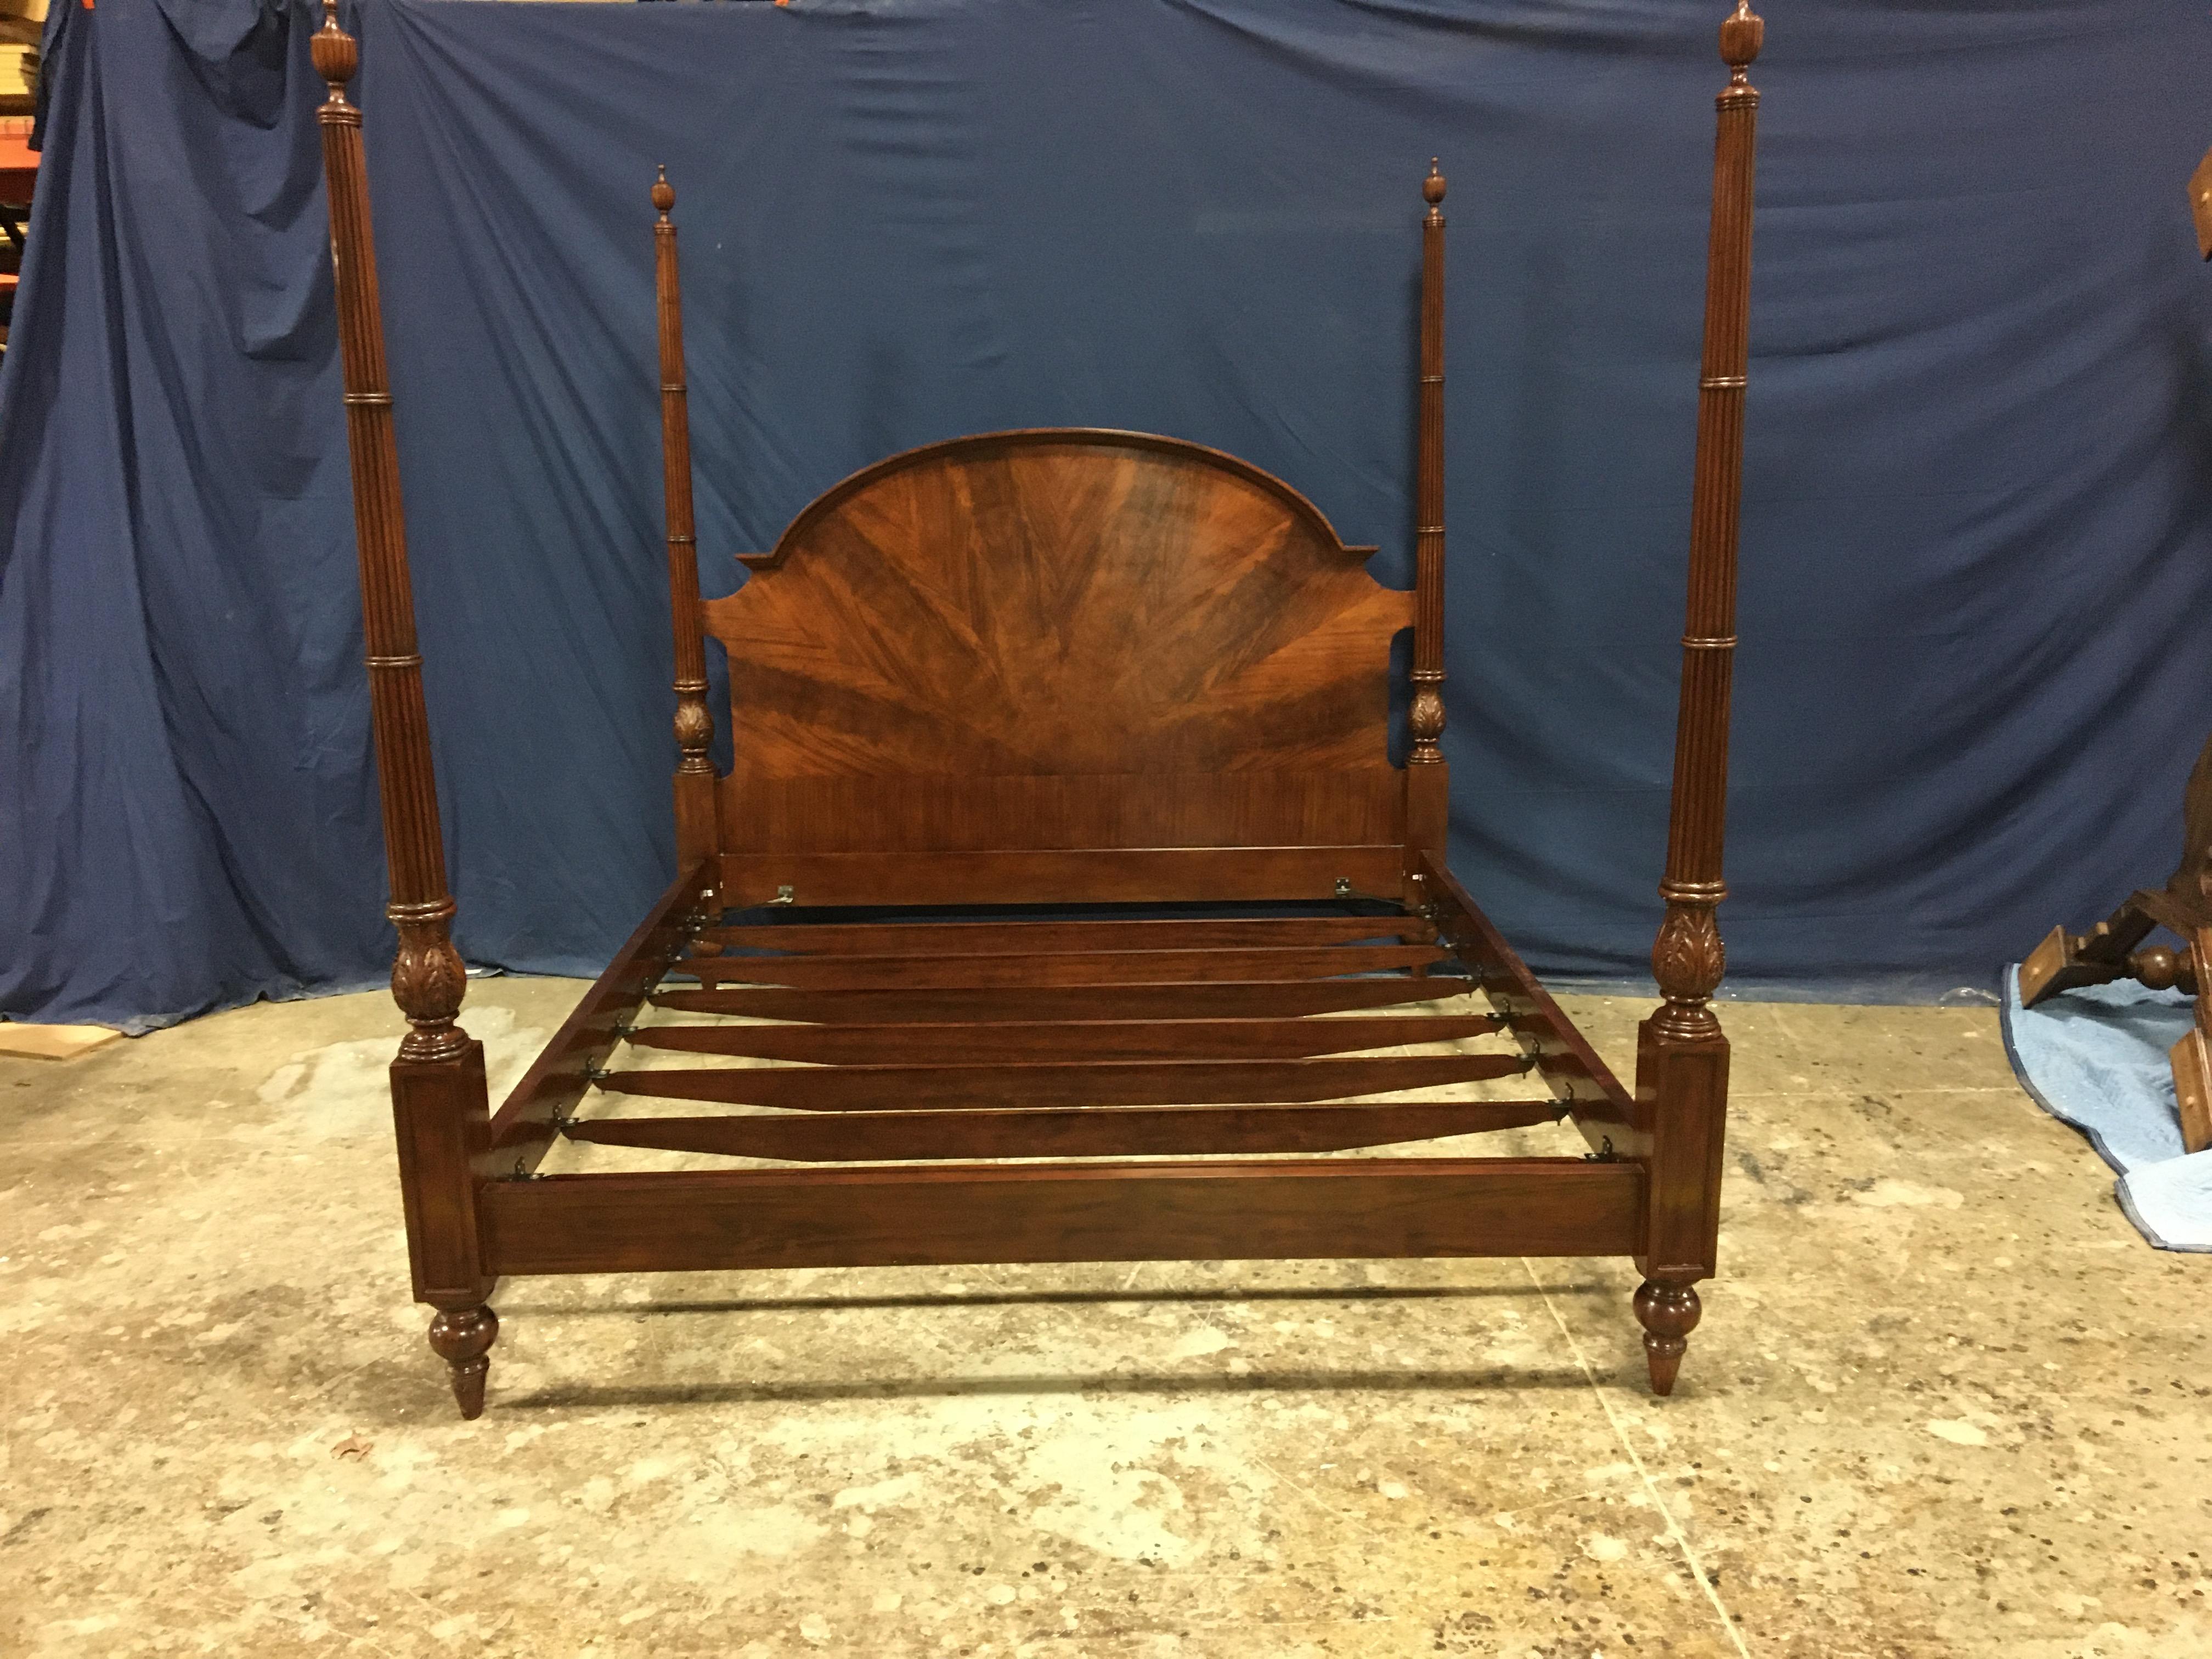 This is a new traditional king size mahogany poster bed by Leighton Hall Furniture. It’s design was inspired by traditional poster beds from the past and features hand carved fluted posts and a radial cut crotch mahogany headboard.

Approximate